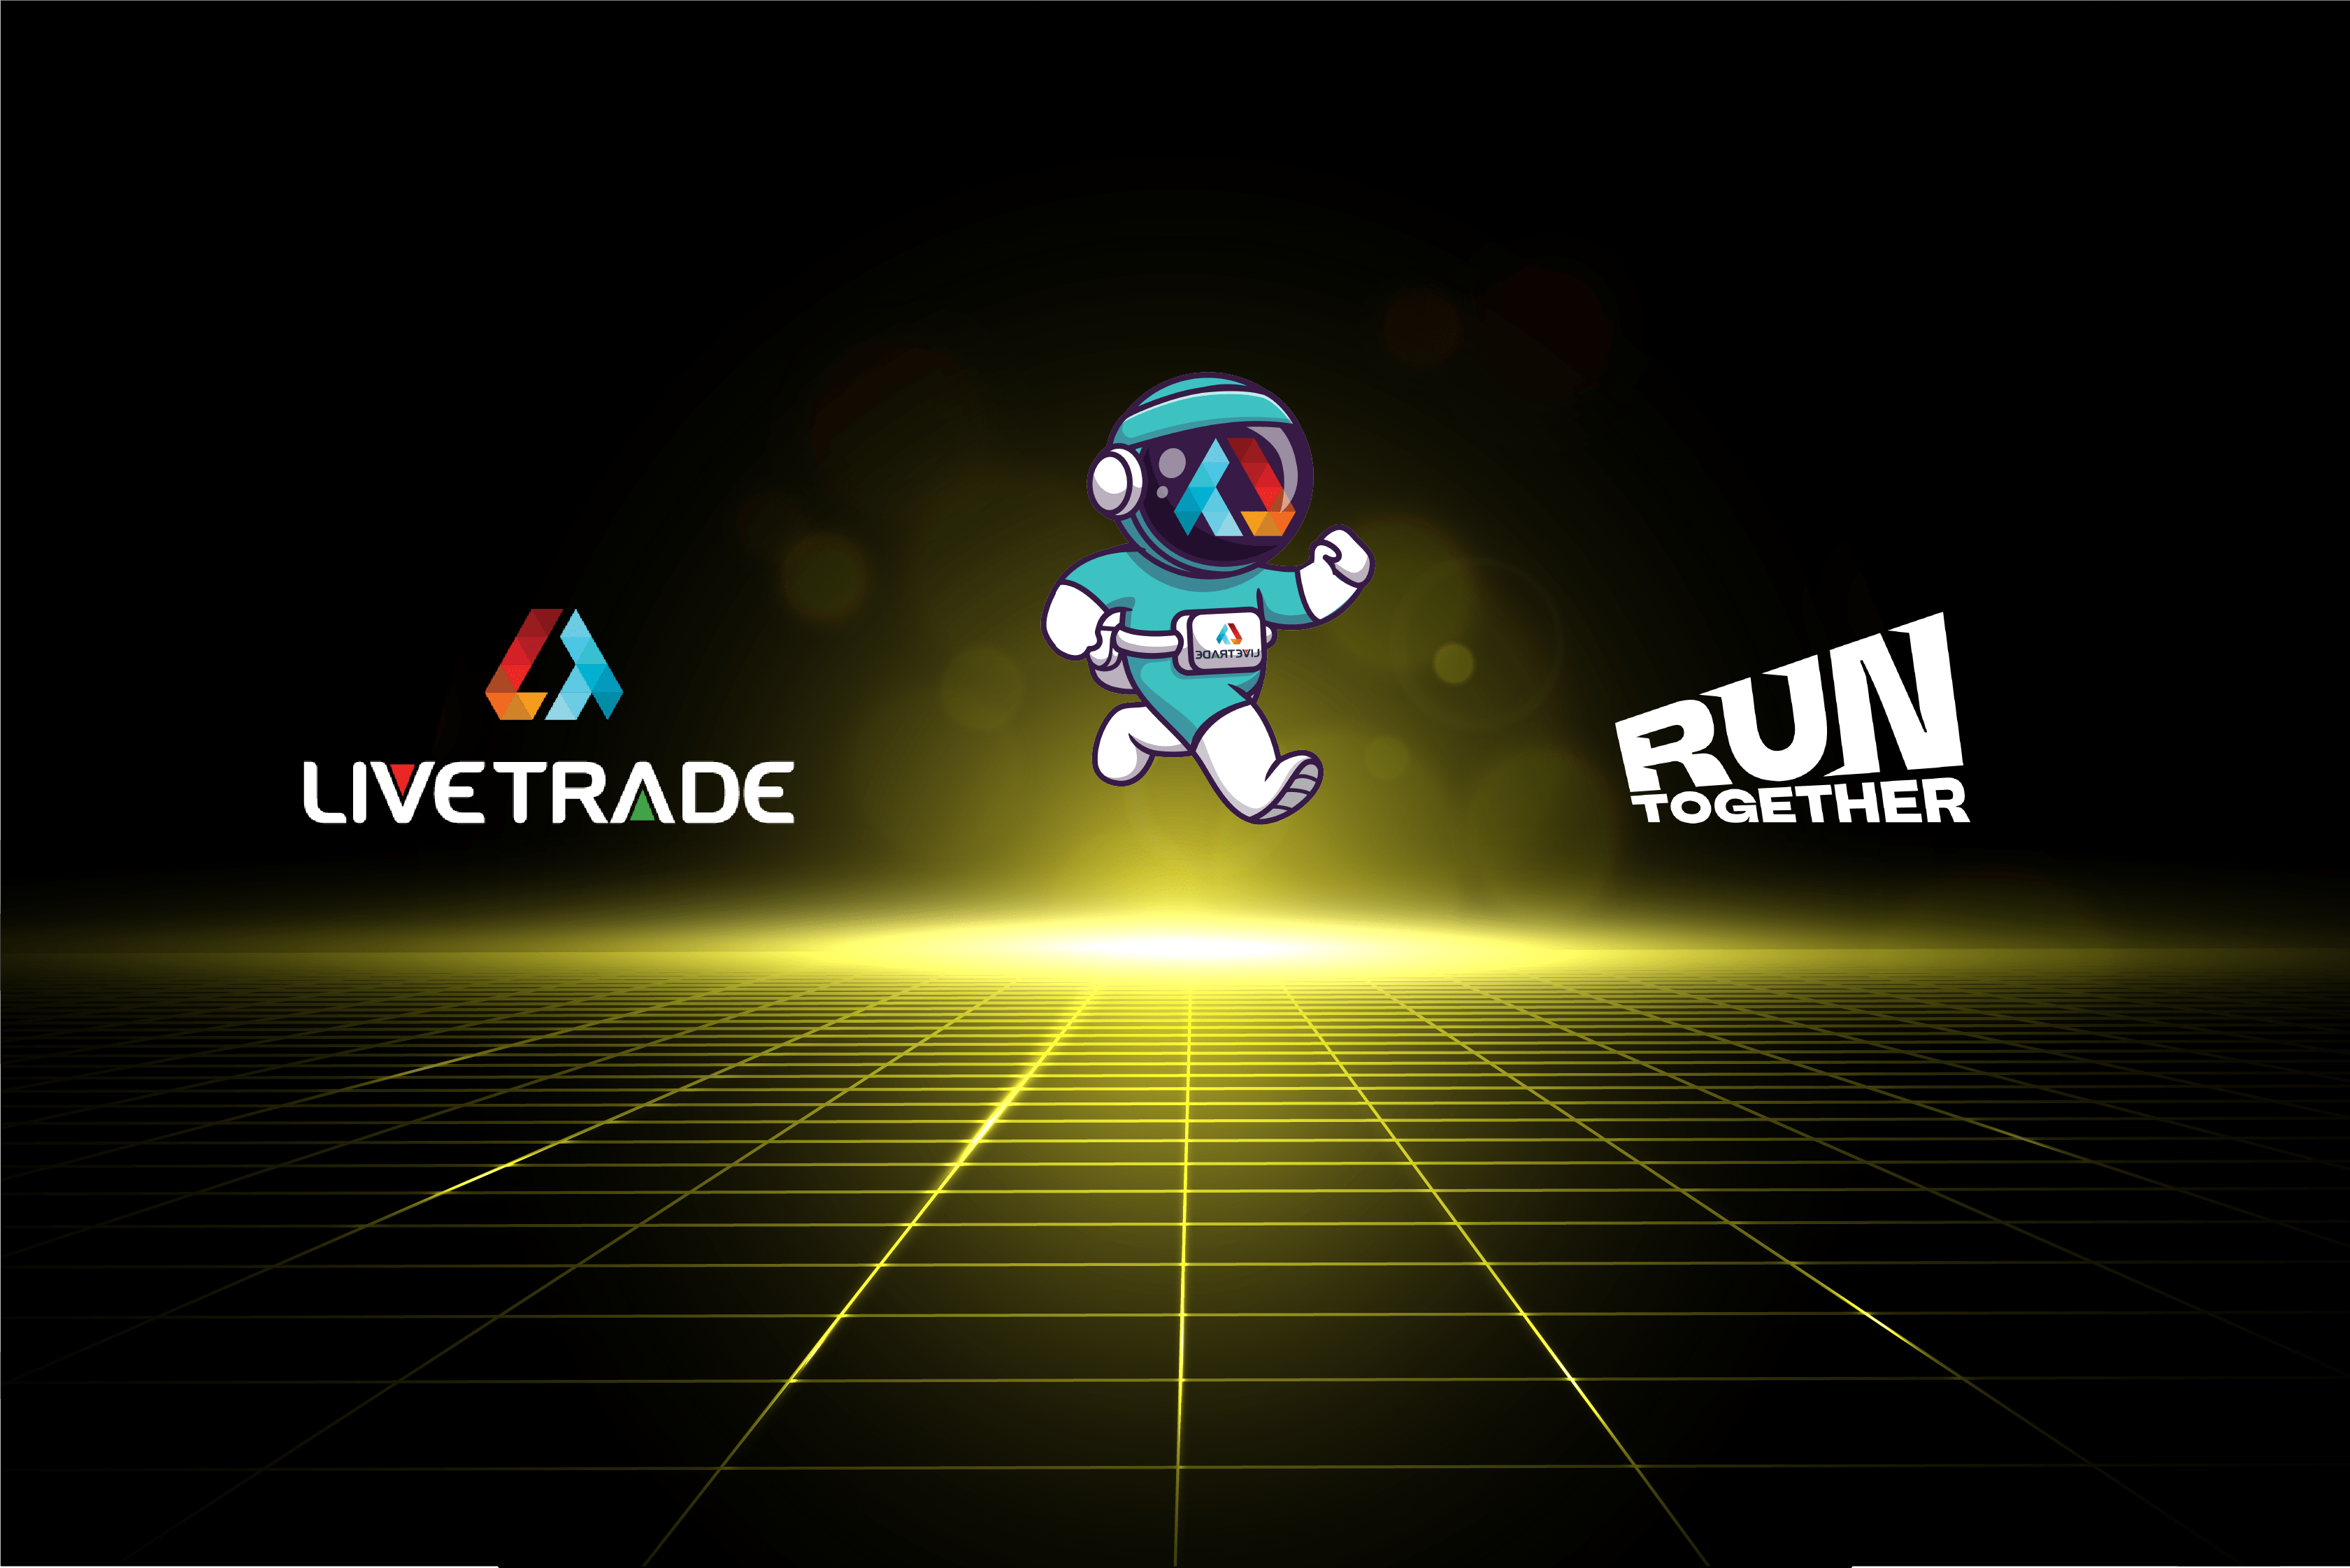 Live_Trade_x_Run_Together